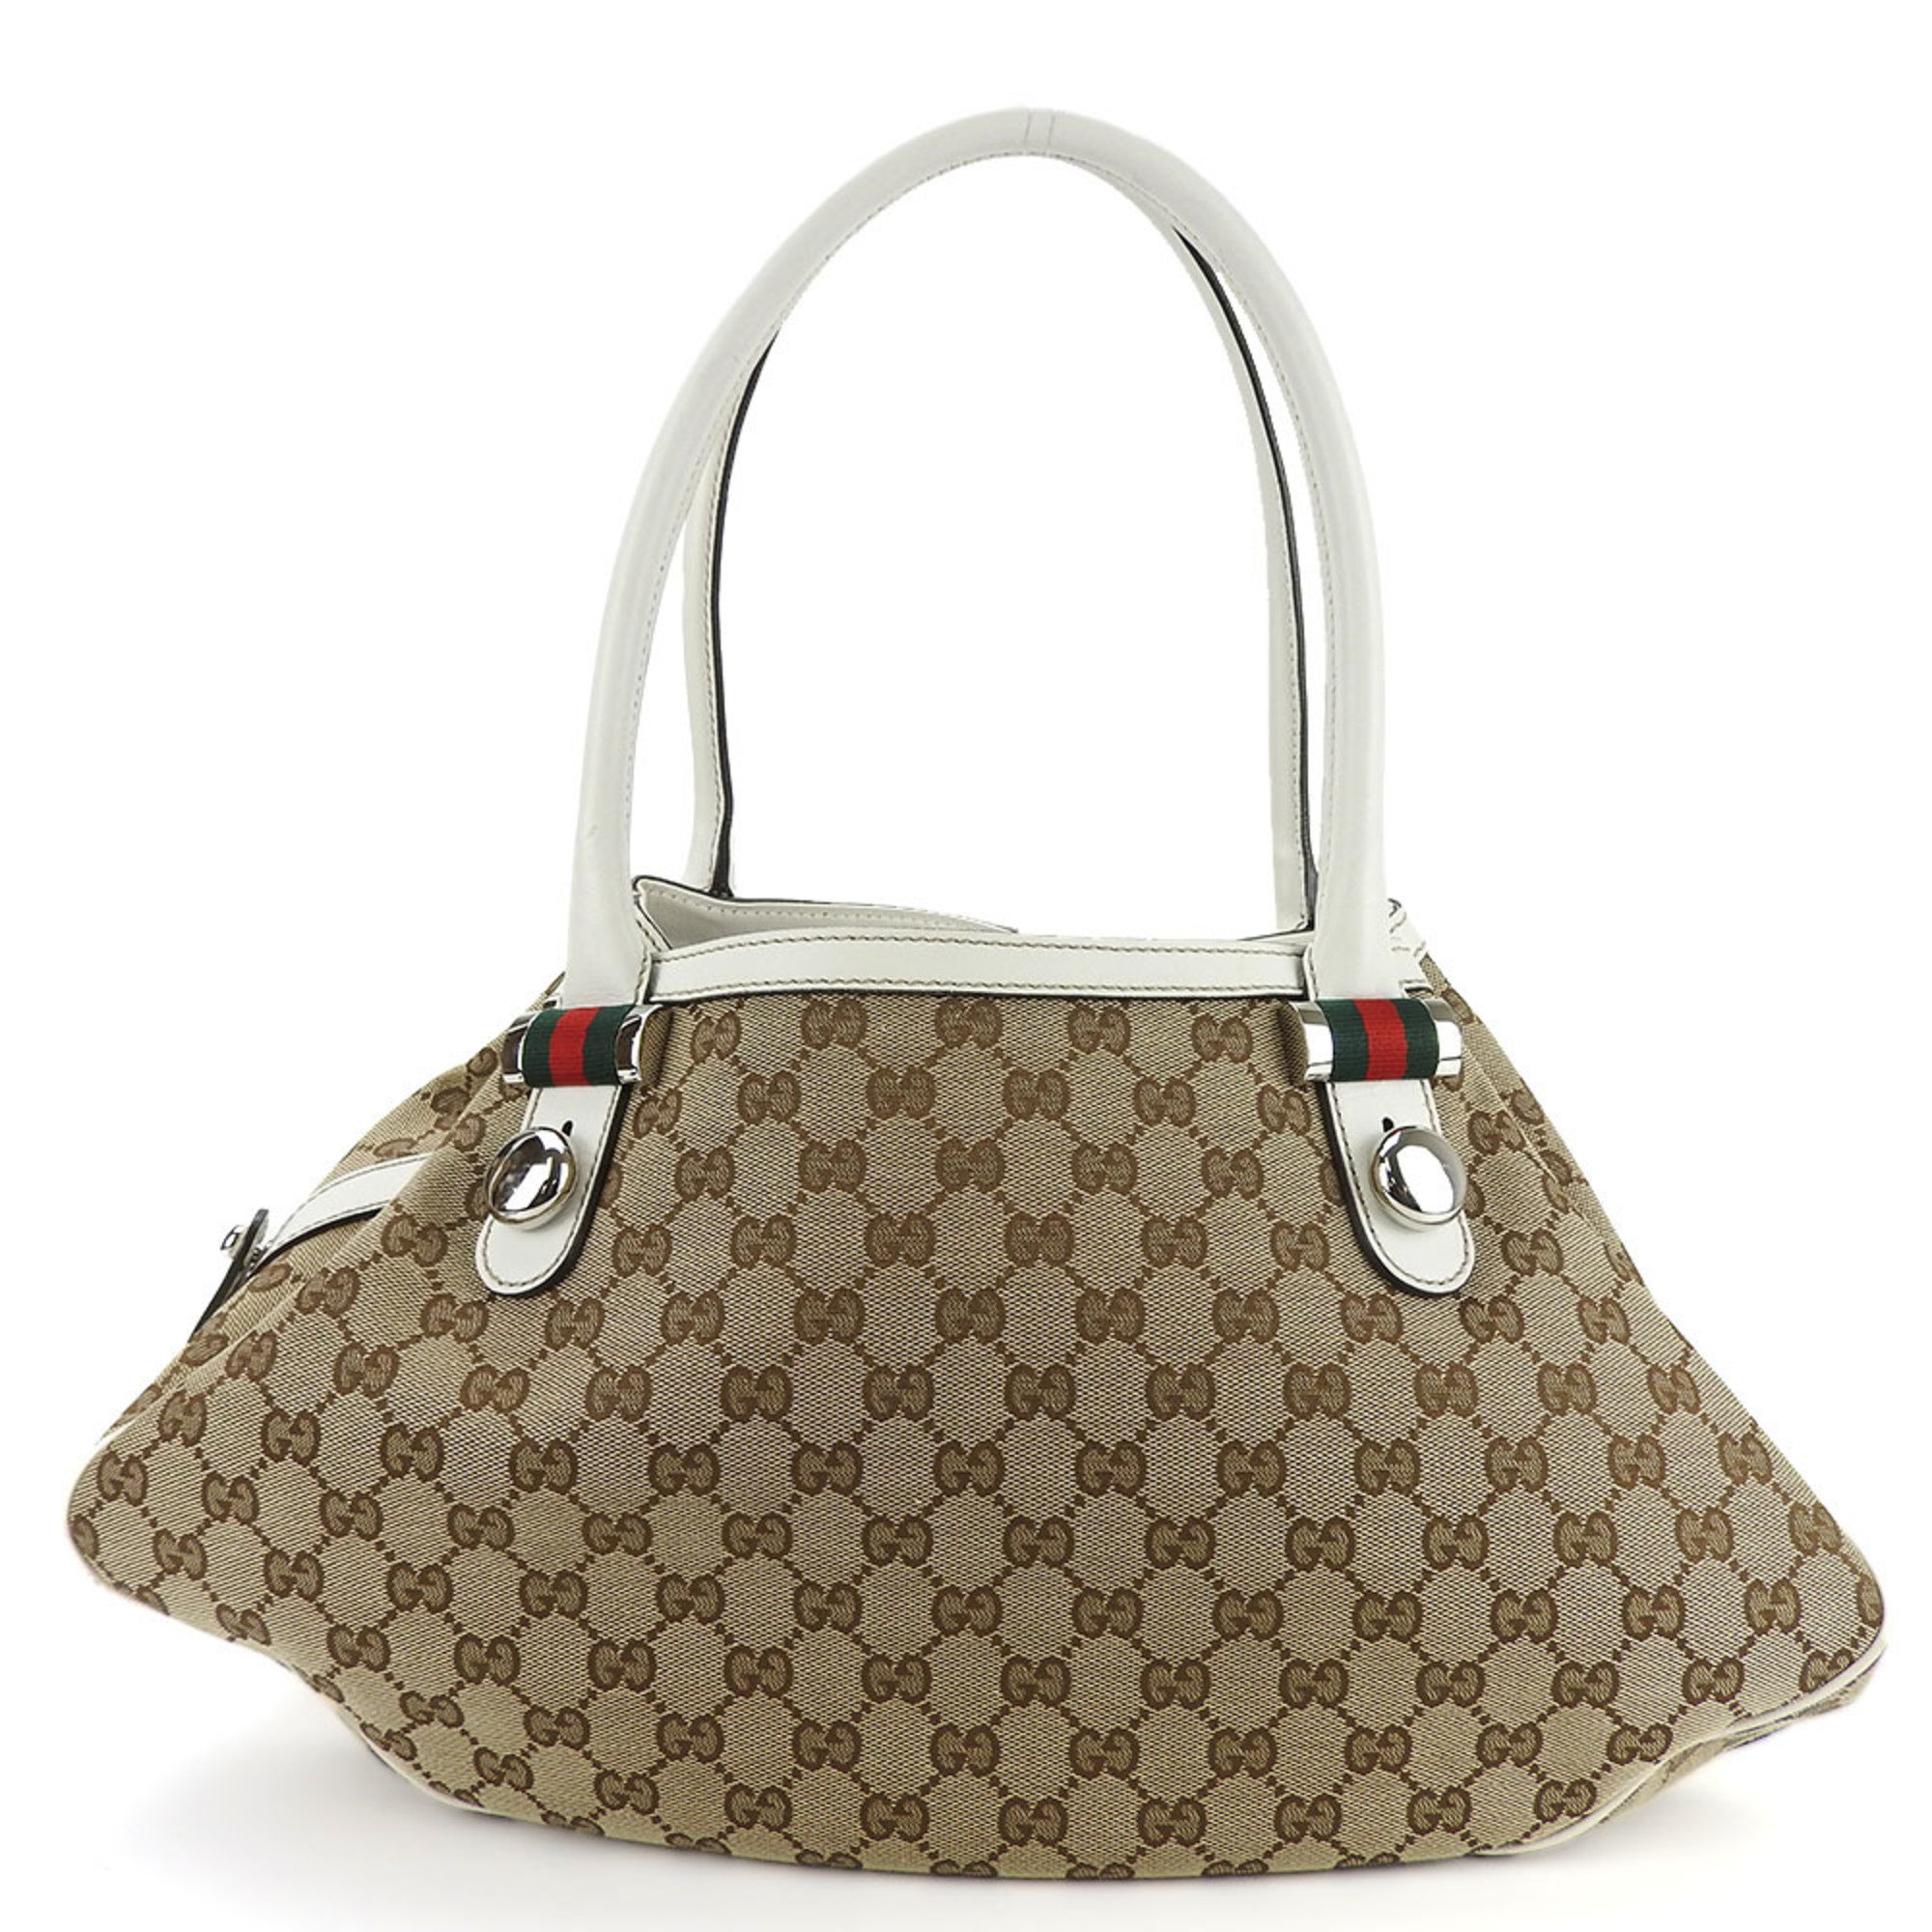 Gucci Tote Bag Matchball 232971 Sherry Line GG Canvas Leather Beige White Women's GUCCI